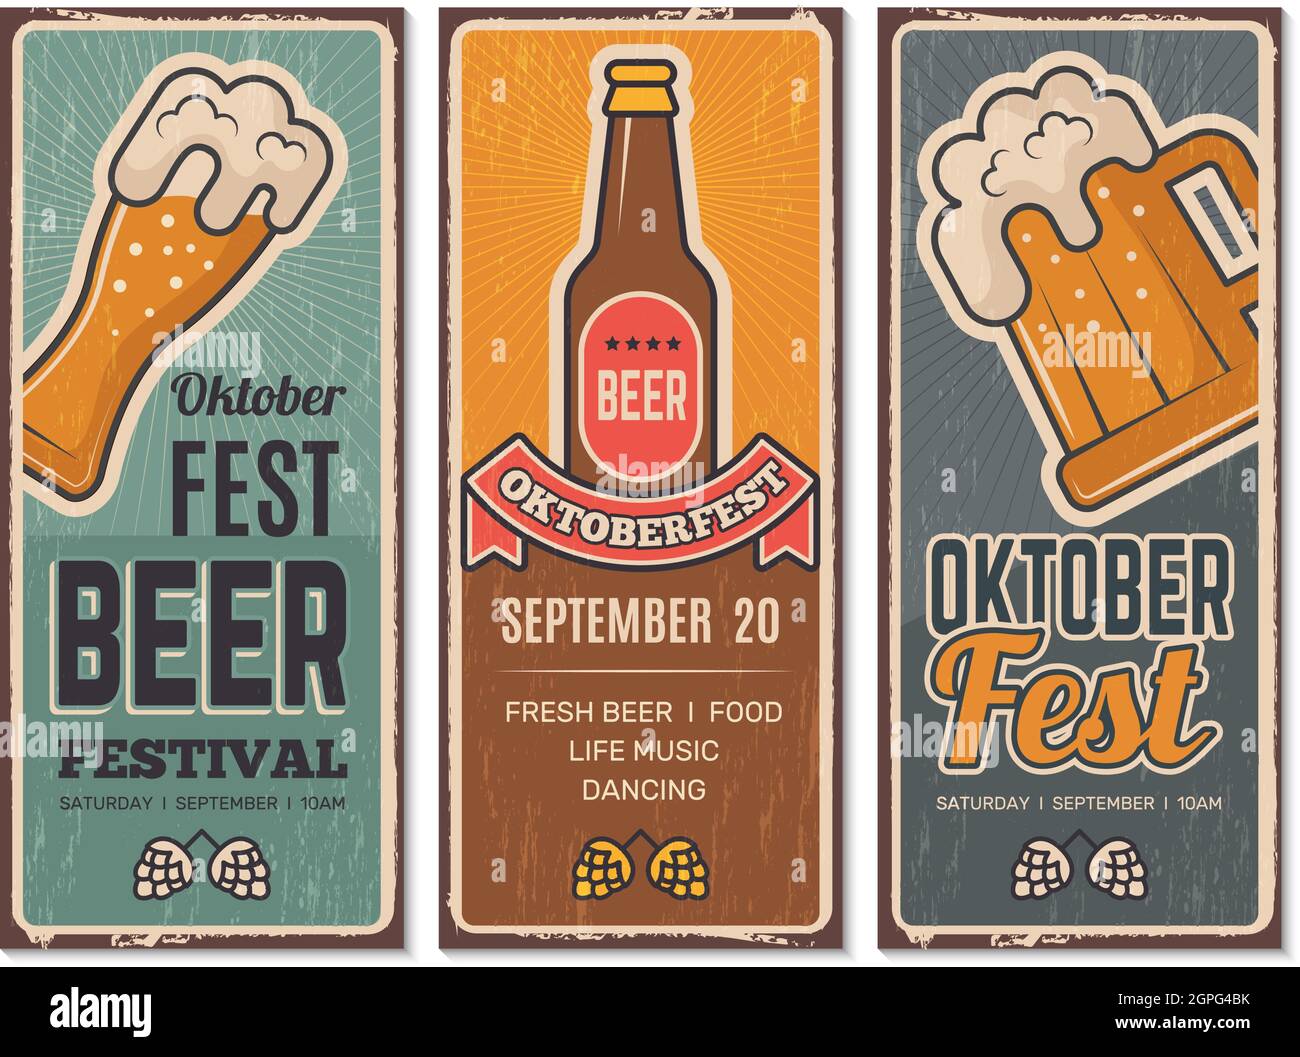 Beer festival invitation. Oktoberfest vintage banners with pictures of craft beers lager germany bavaria pub drink menu pictures vector retro template Stock Vector